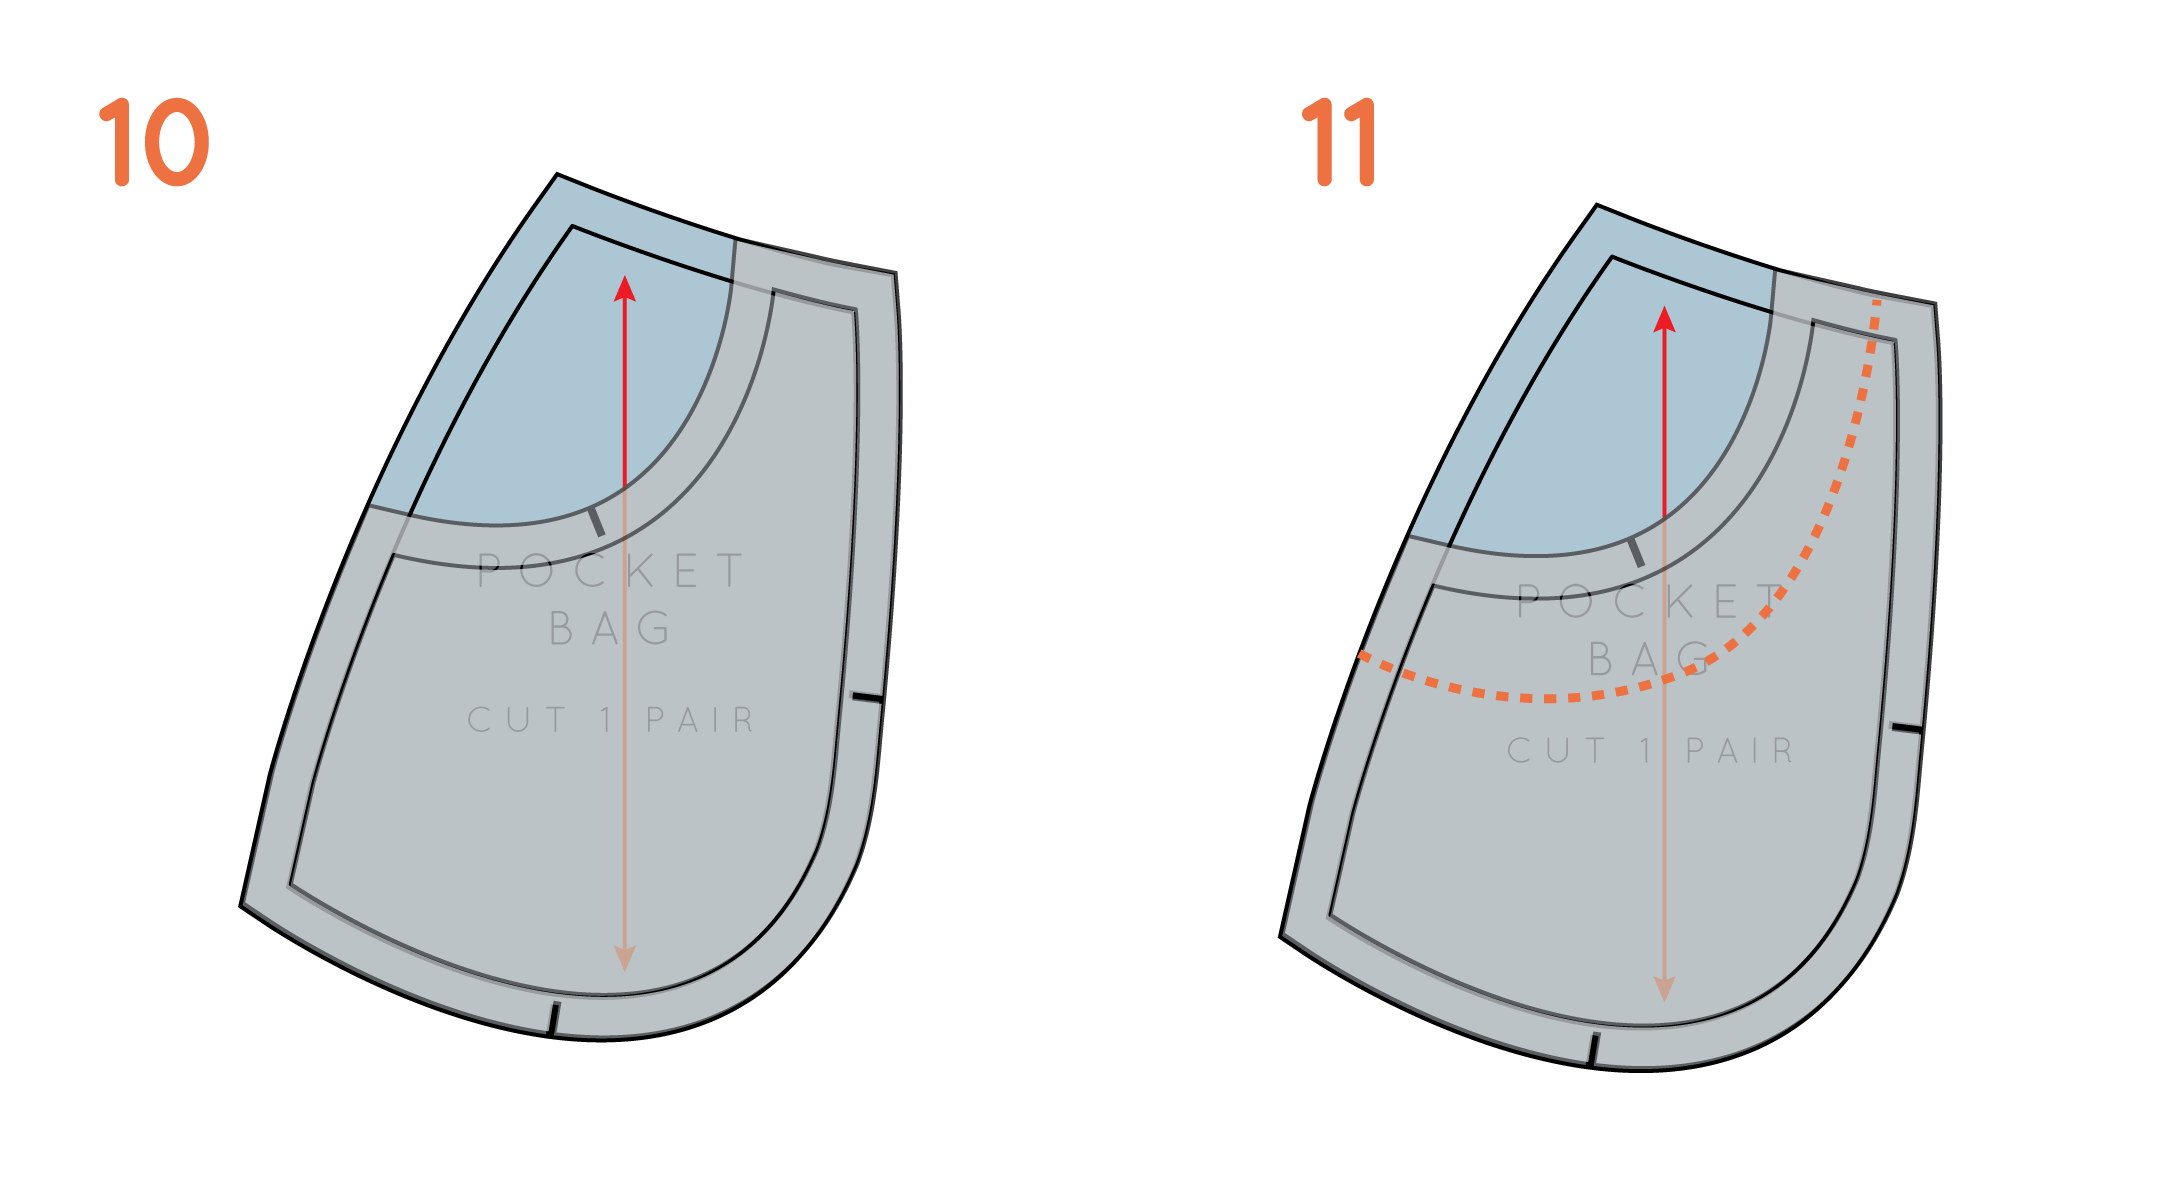 How to : Draft side pockets — In the Folds